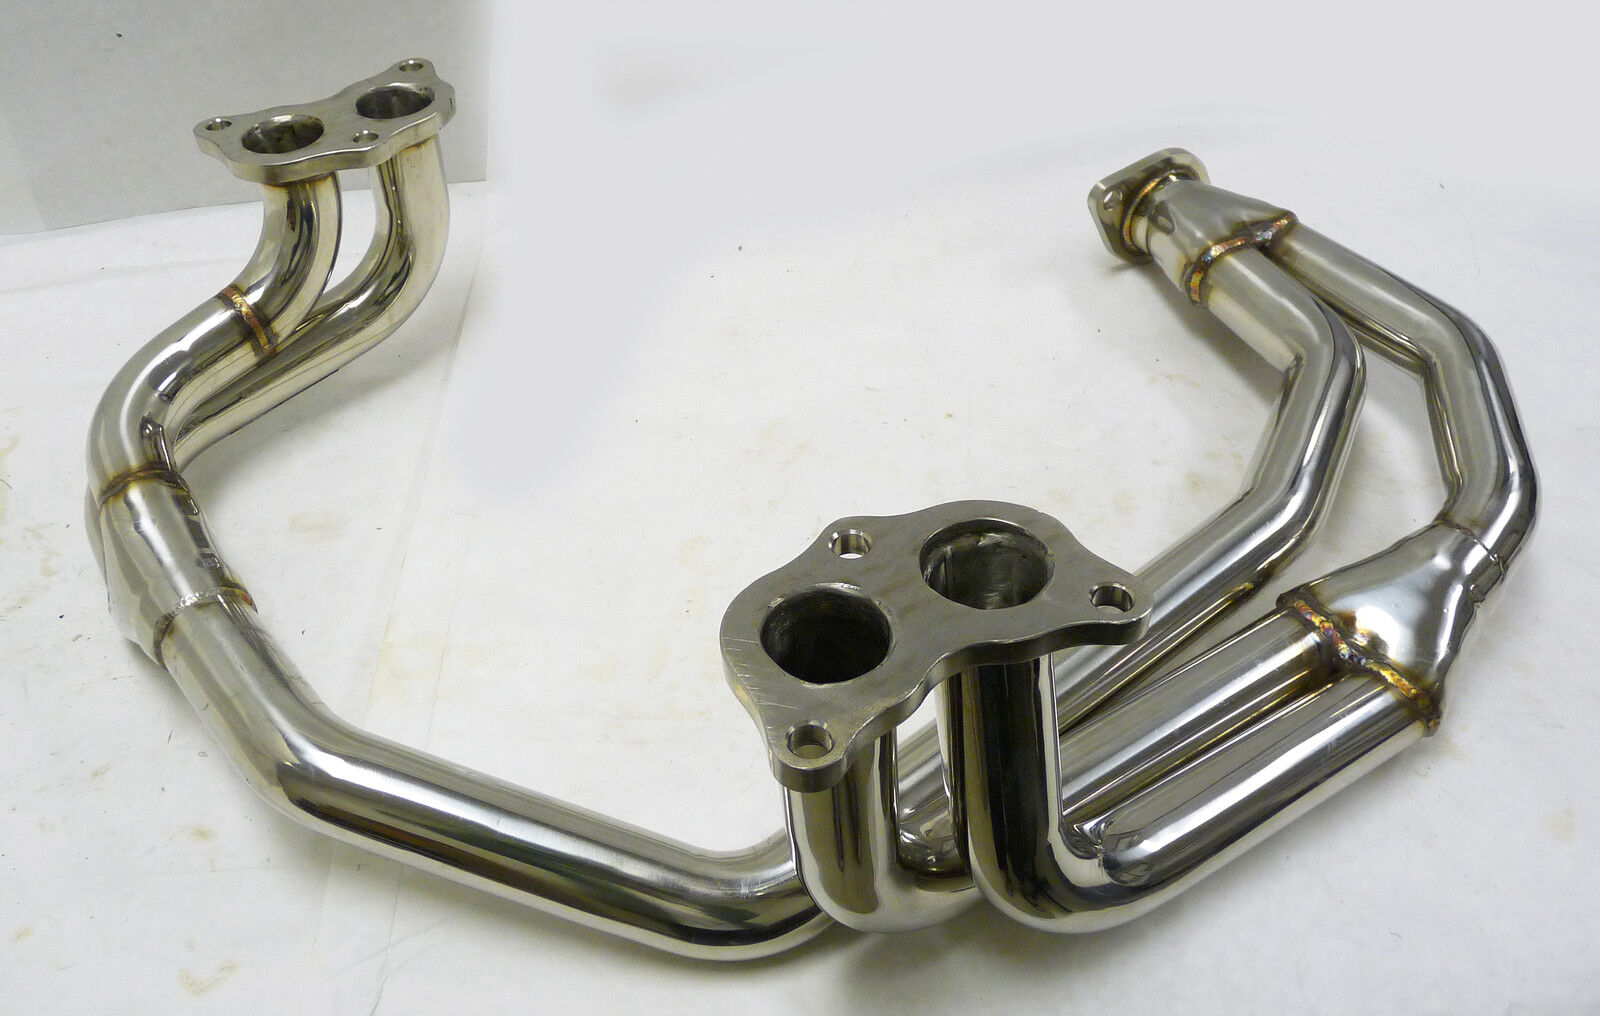 OBX Stainless Header For 1995-2001 Subaru Impreza 2.5L, 97-02 Forester 2.0/2.2